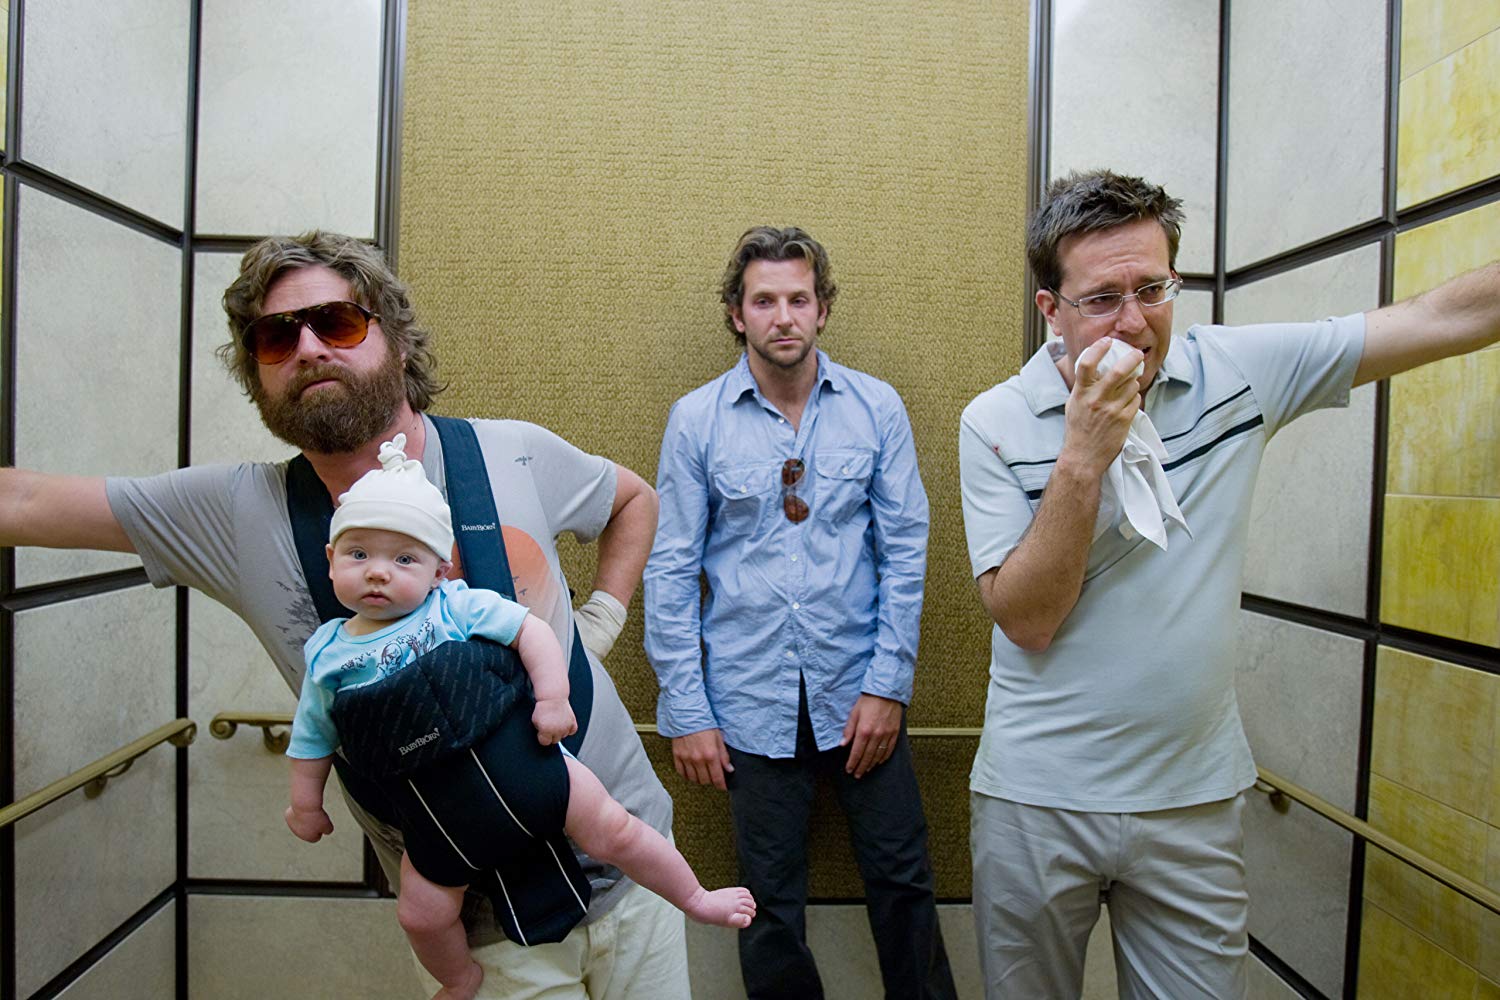 Three men in an elevator. One wears a baby in a carrier on his chest.